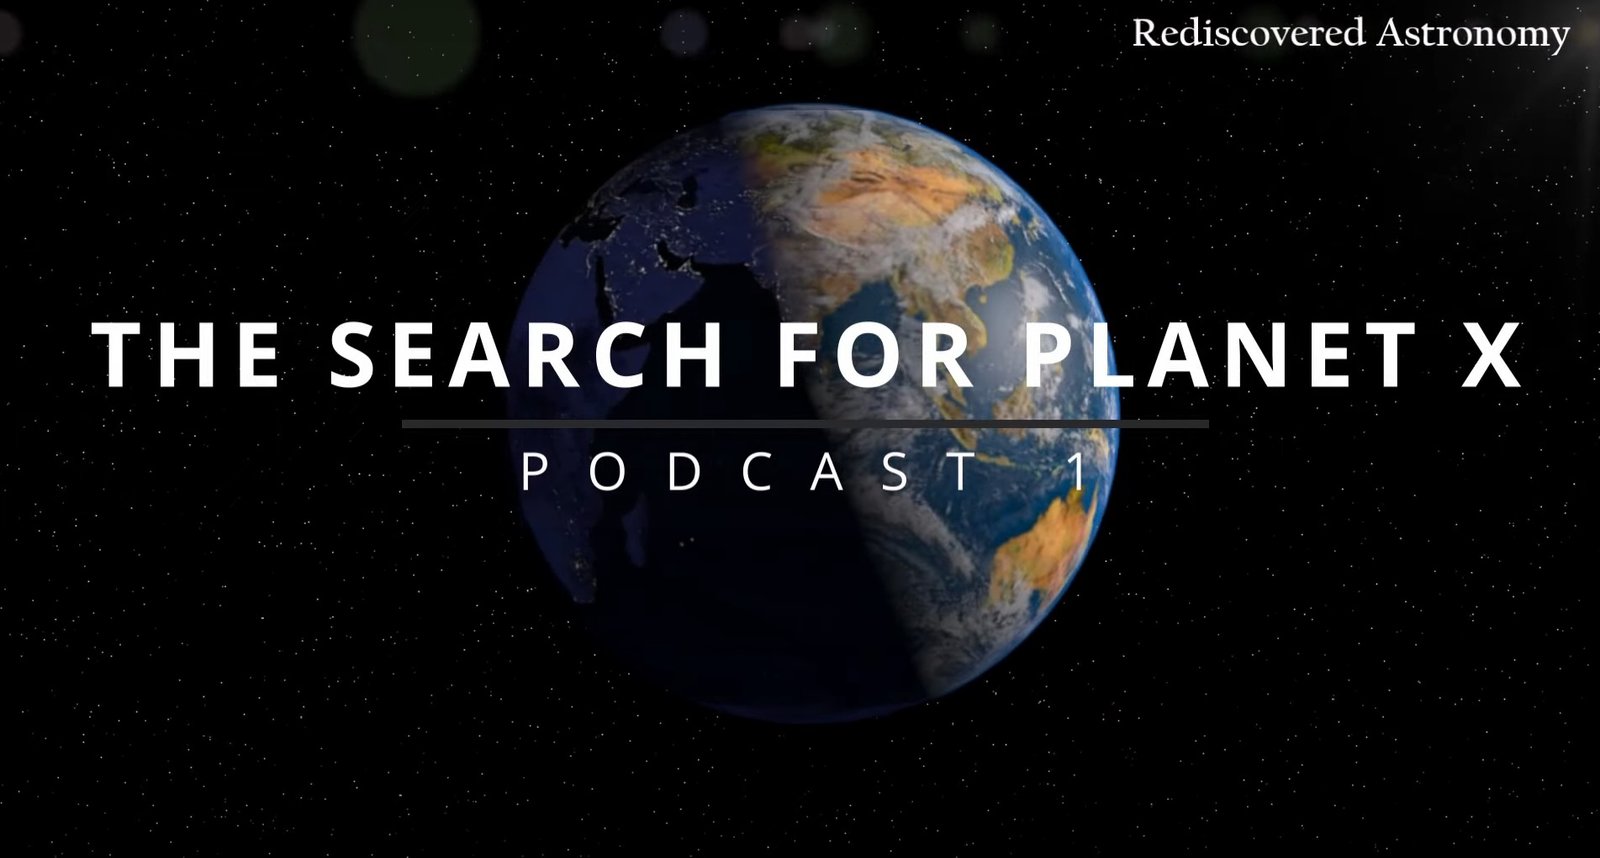 Rediscovered Astronomy Podcast Episode 1